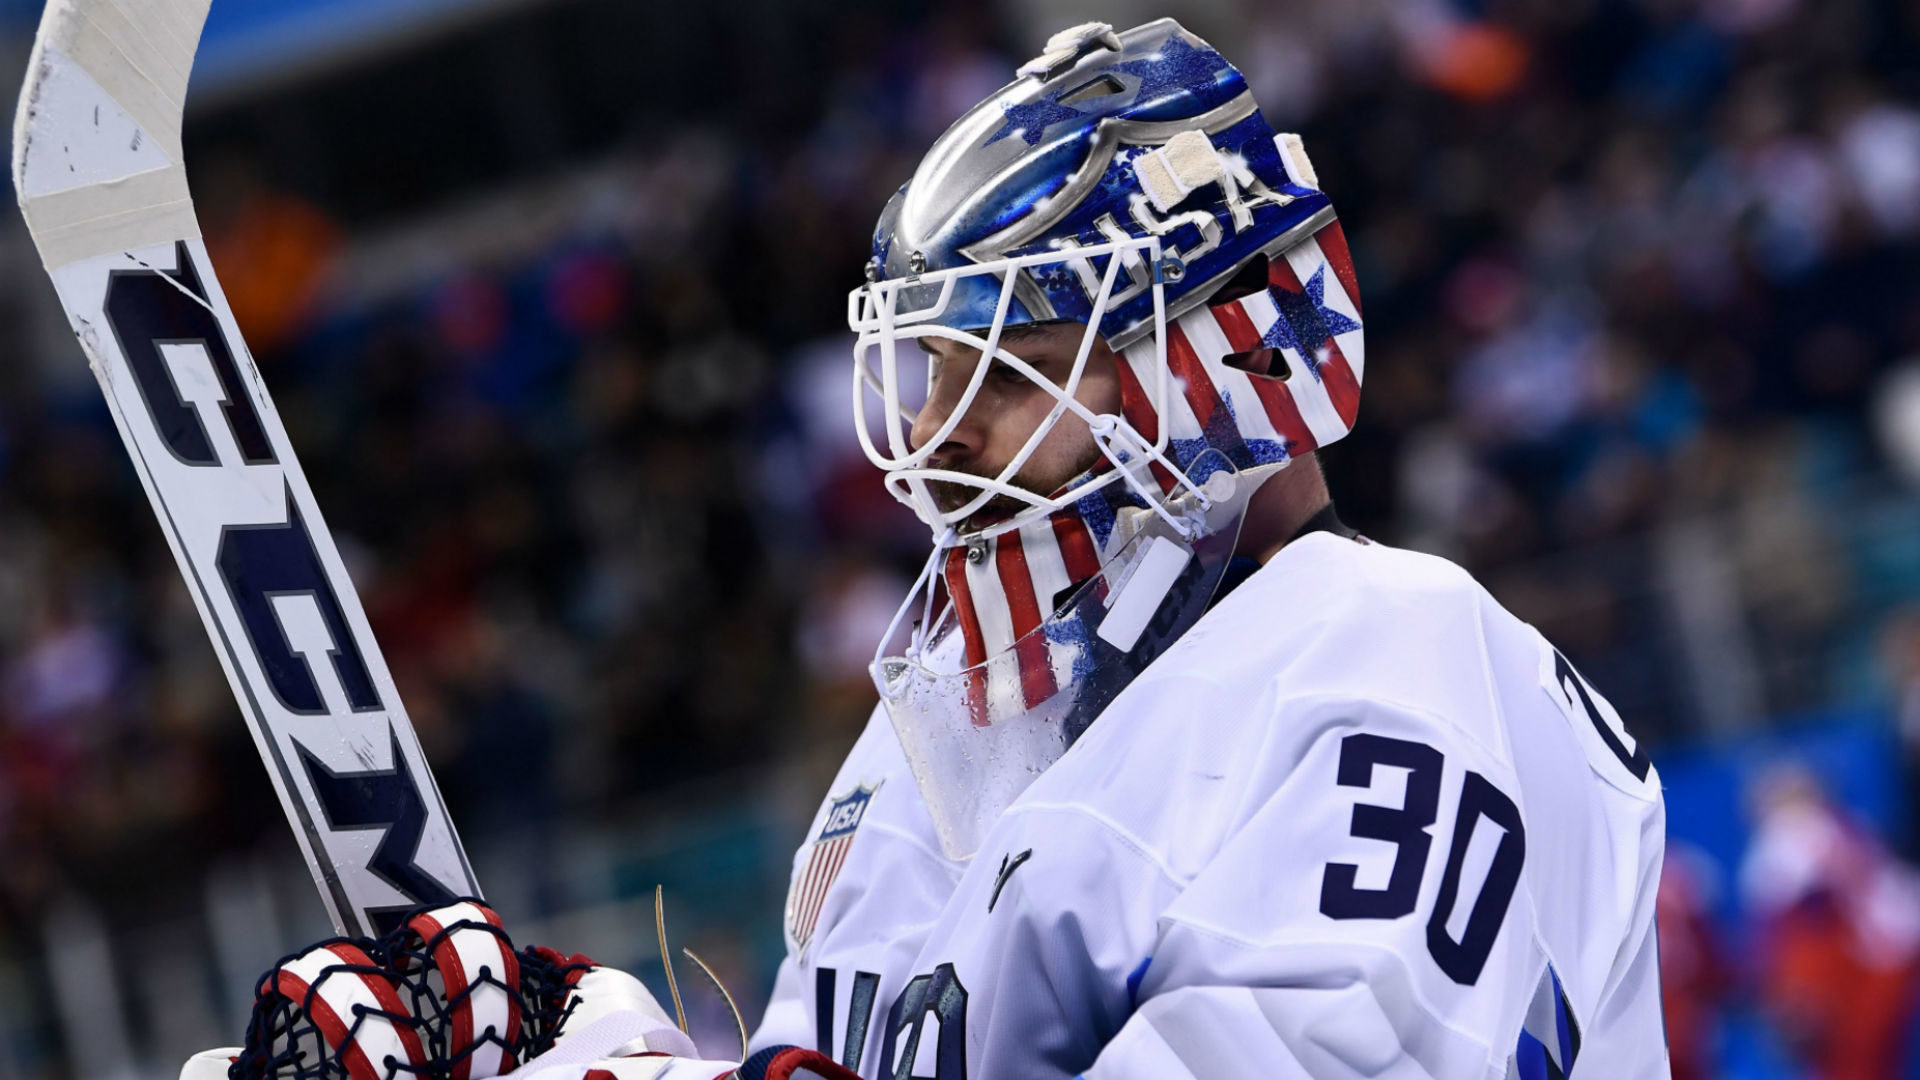 1920x1080 USA men's hockey's Olympic medal dreams end in shootout loss to Czech  Republic